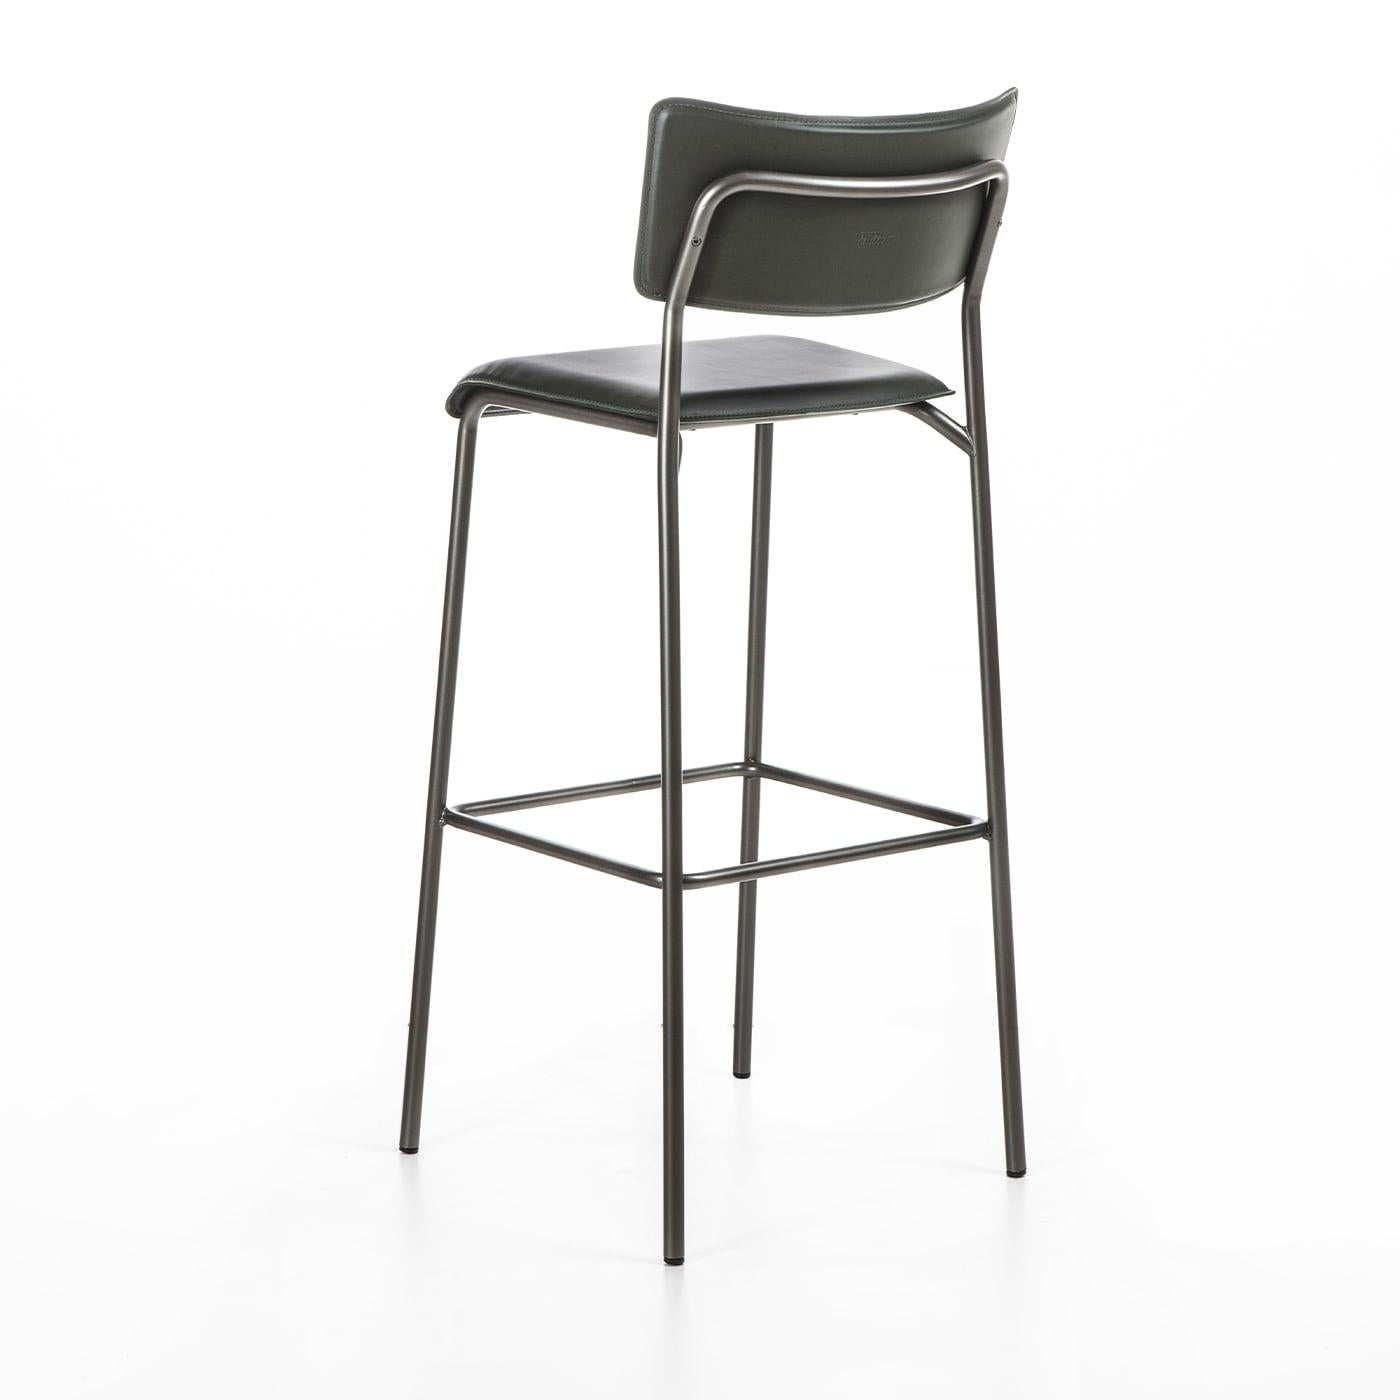 A fresh and stylish design of minimalist inspiration, this gorgeous bar stool boasts clean and essential lines highlighted with a total-white look. Boasting a sleek structure defined by cylindrical lines and fashioned of lacquered metal, the seat